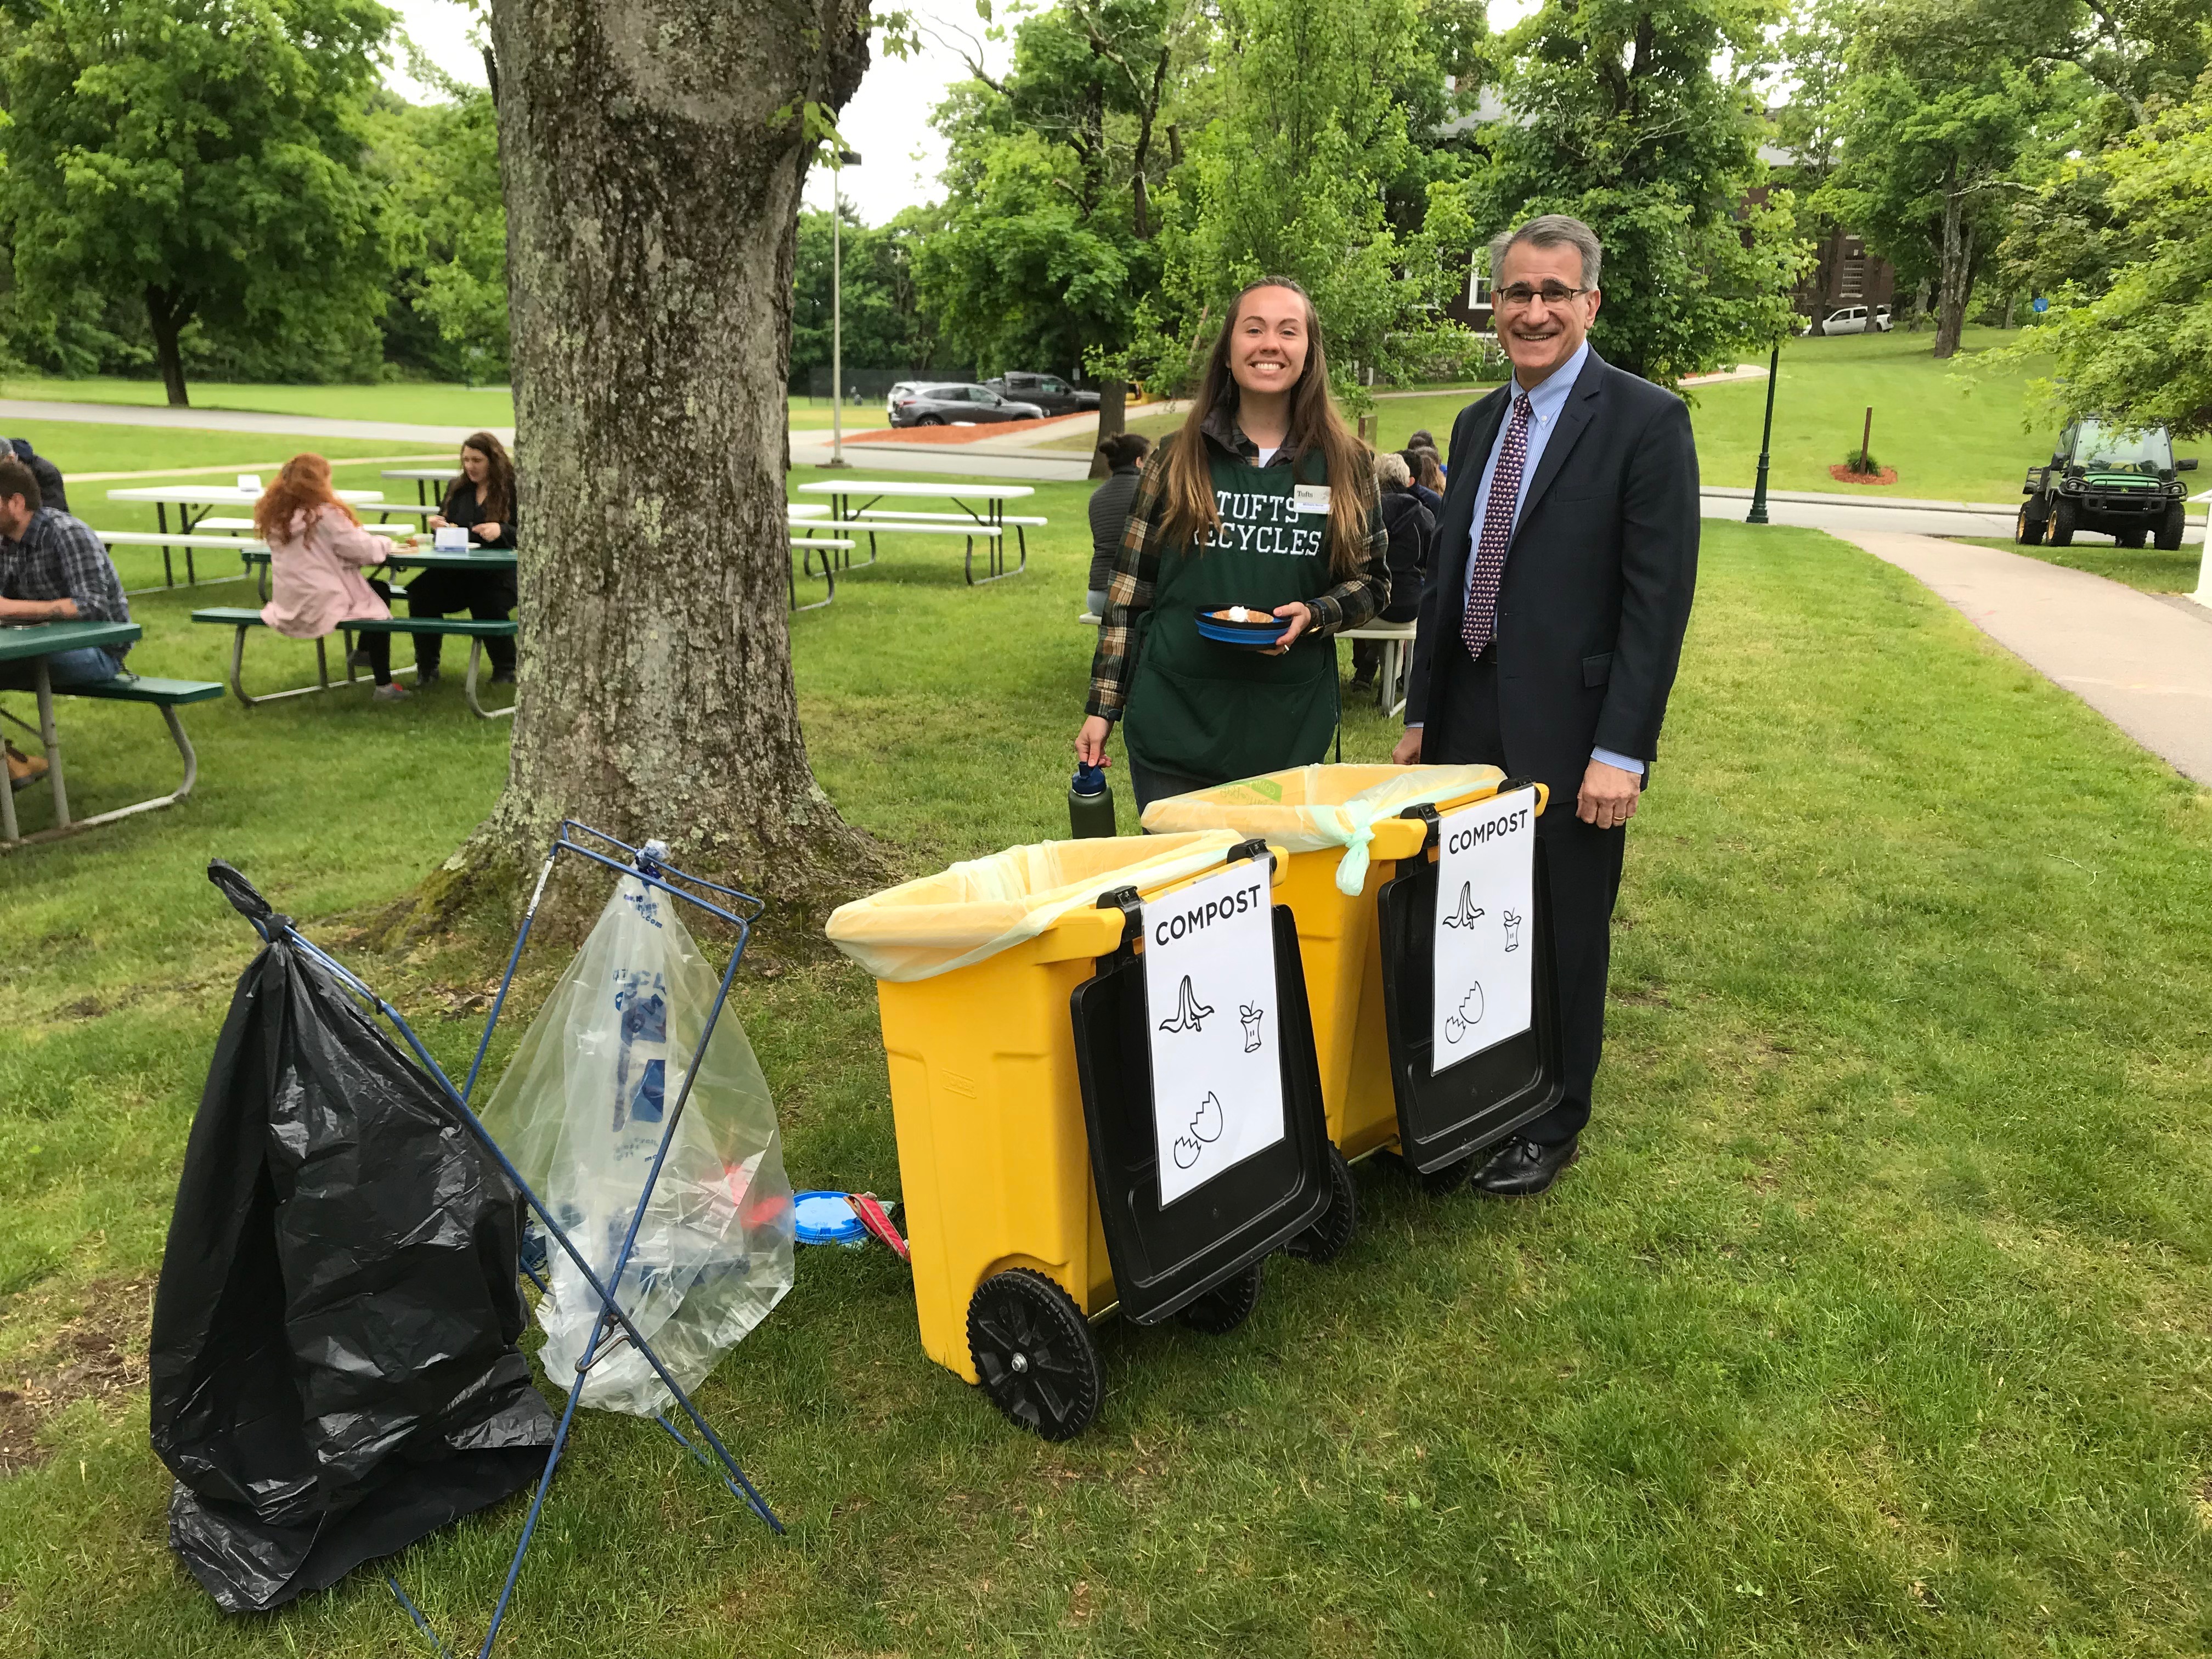 A woman and a man in smiling near compost bins at a zero waste event